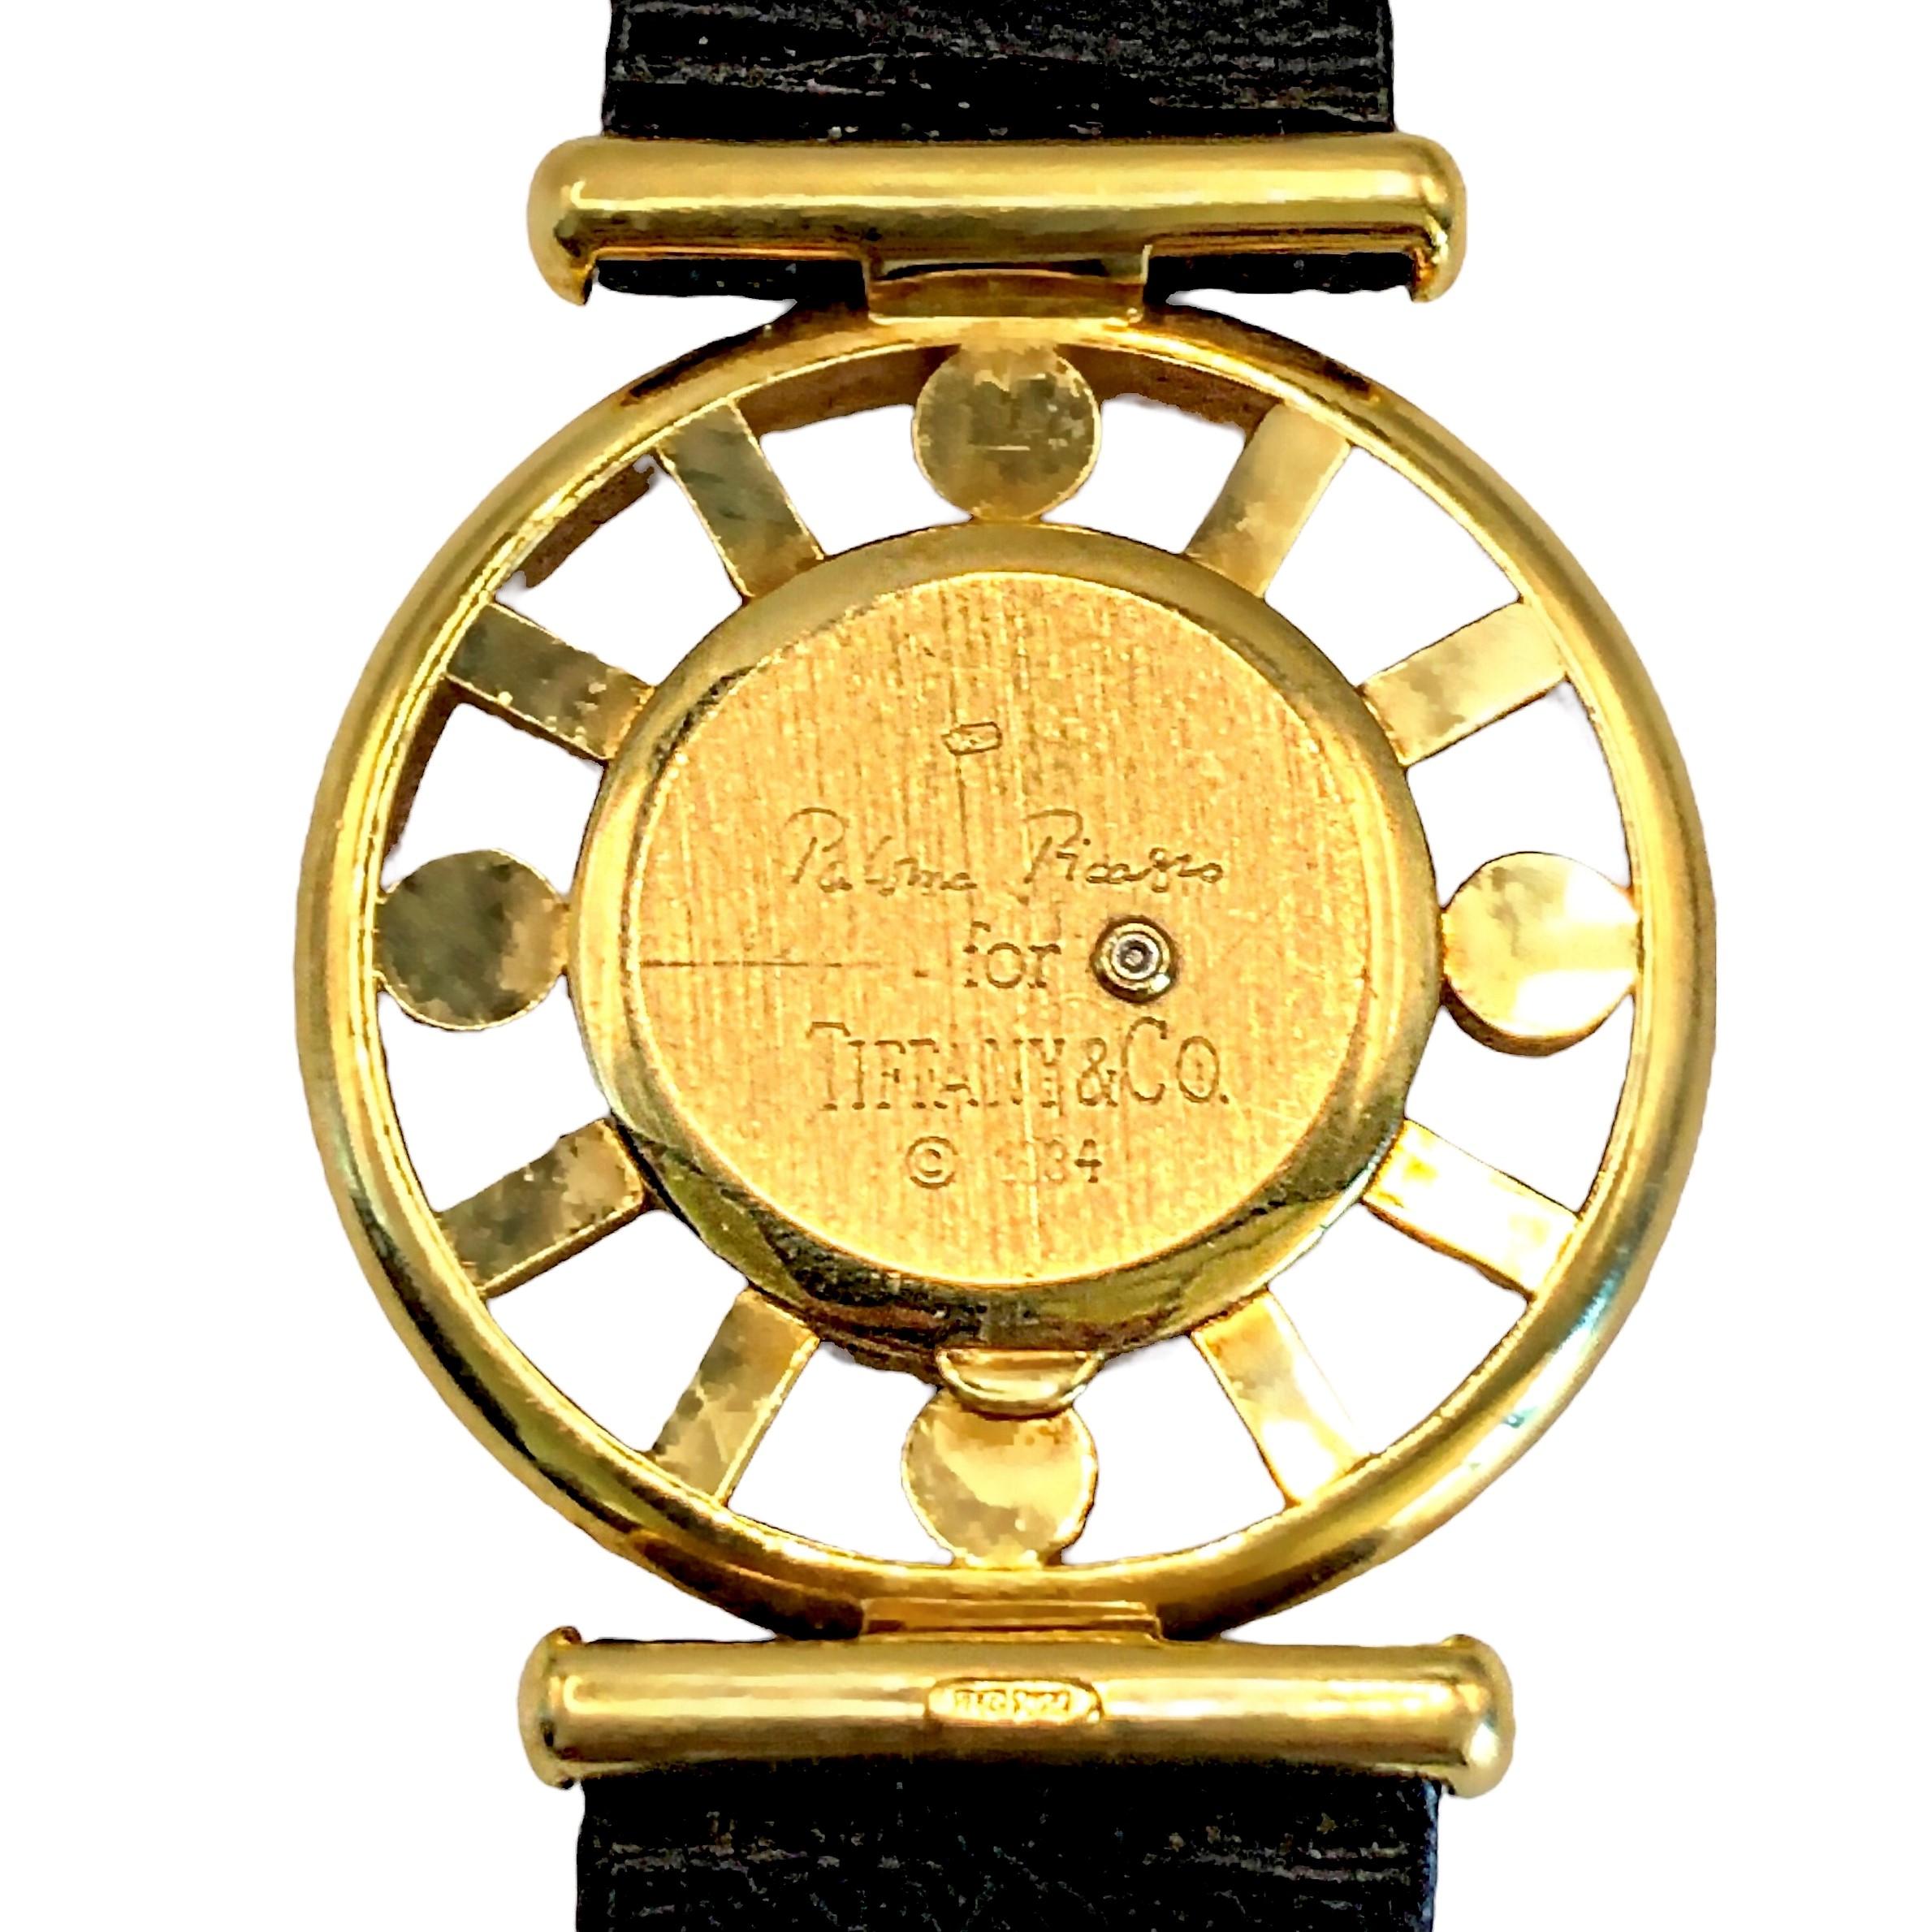 This lovely late 20th Century Tiffany wrist watch is crafted from 18K yellow gold and measures a full 31mm in diameter. The design is edgy and striking as are many Paloma designs. It is signed Paloma Picasso for Tiffany & Co. on the back plate, and